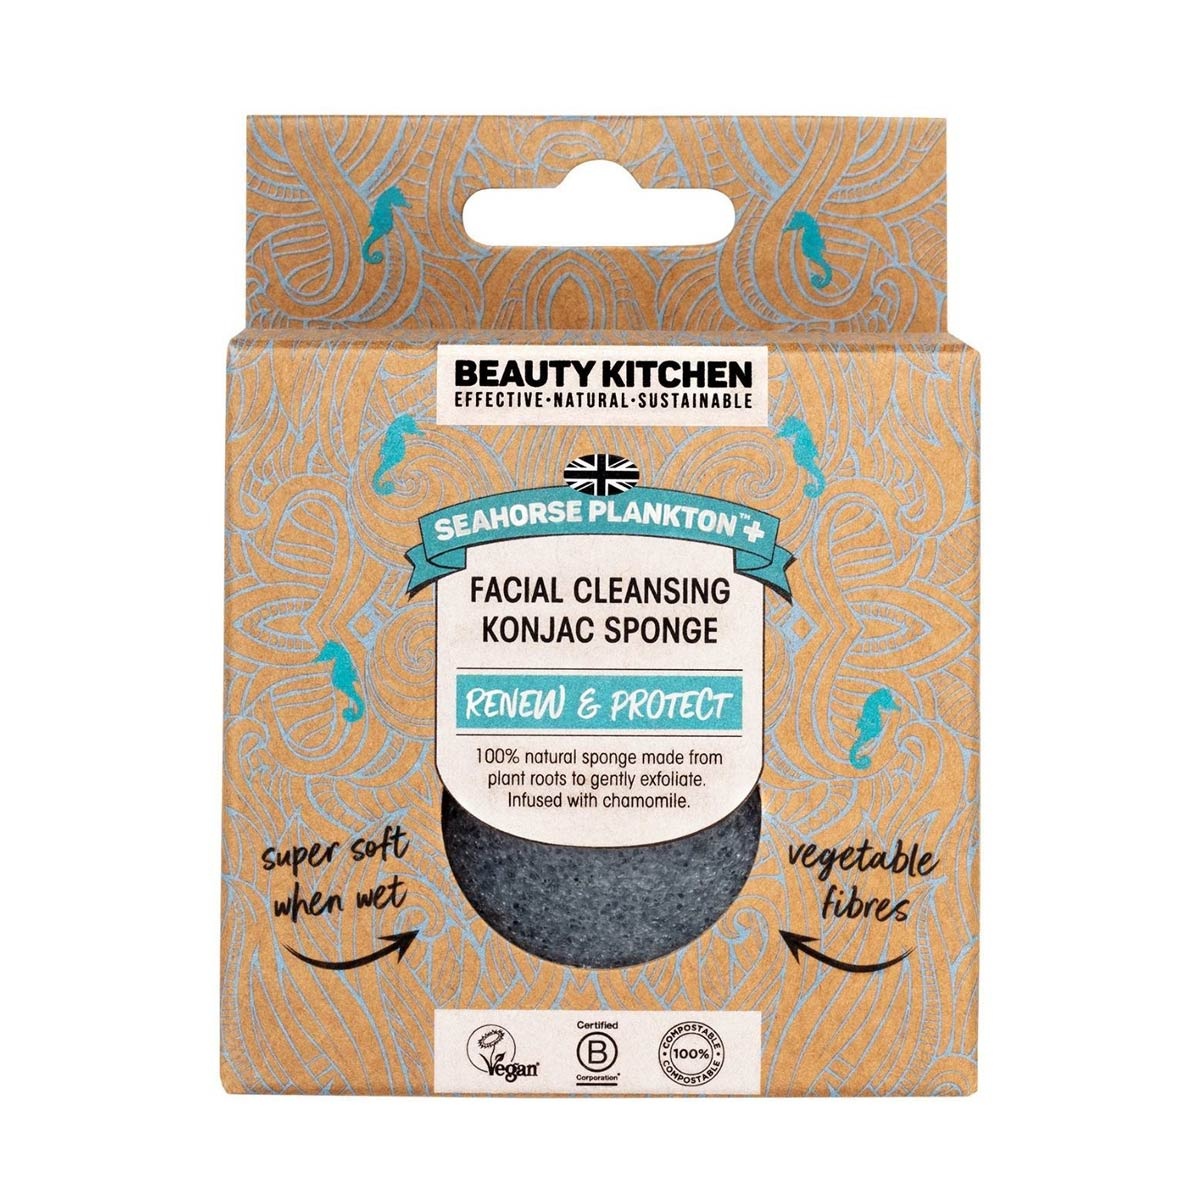 Beauty Kitchen Seahorse Plankton Facial Cleansing Konjac Sponge Peace With The Wild